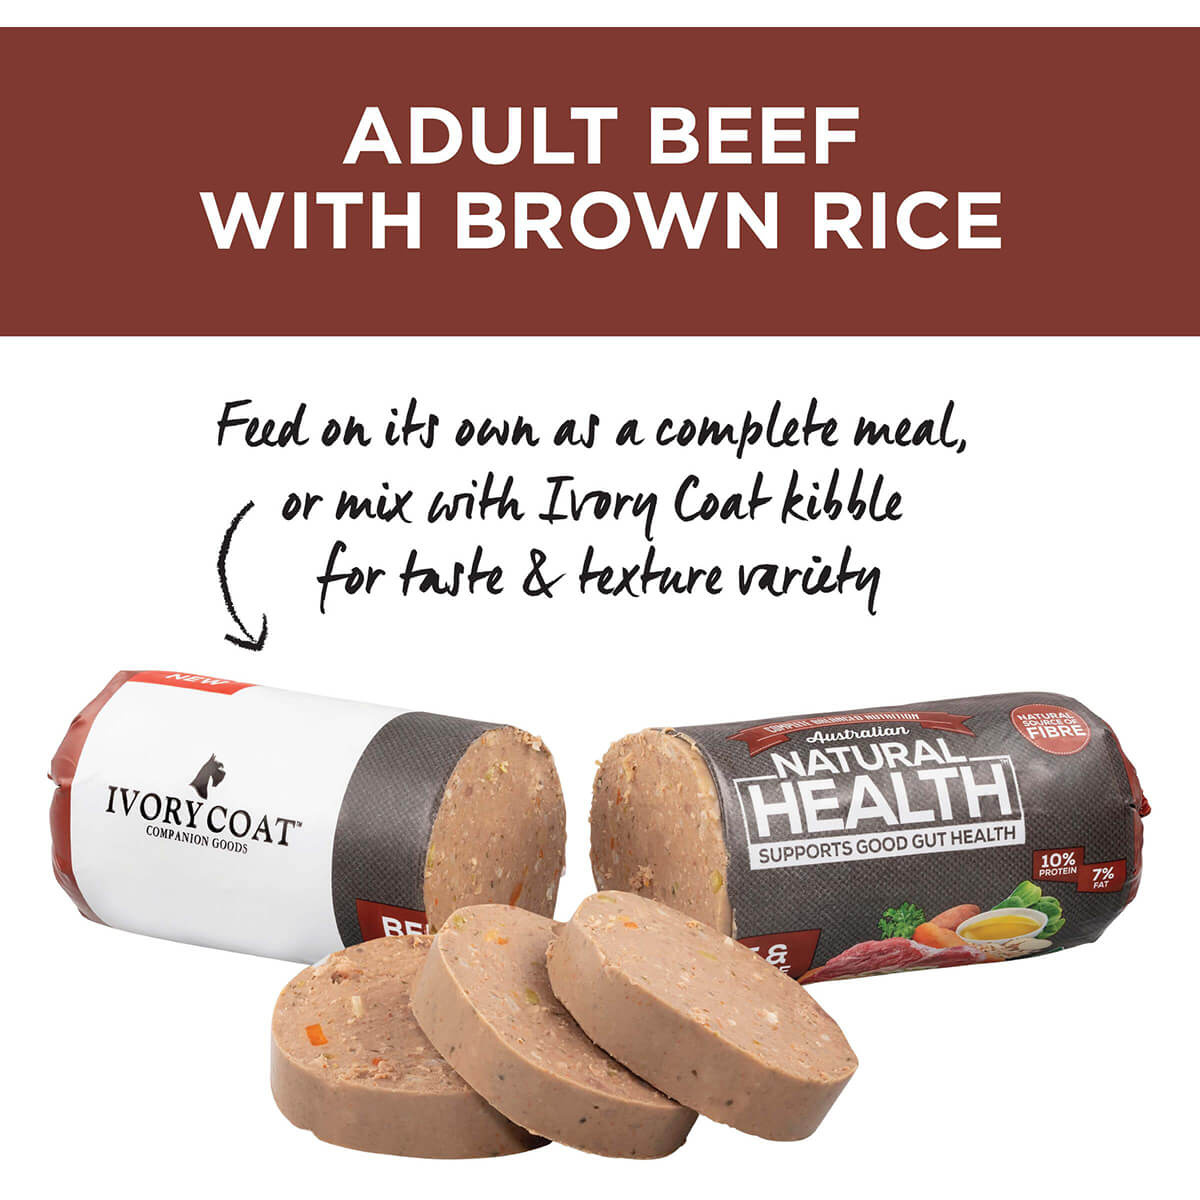 Ivory Coat Adult Beef & Brown Rice Dog Roll 1.4kg